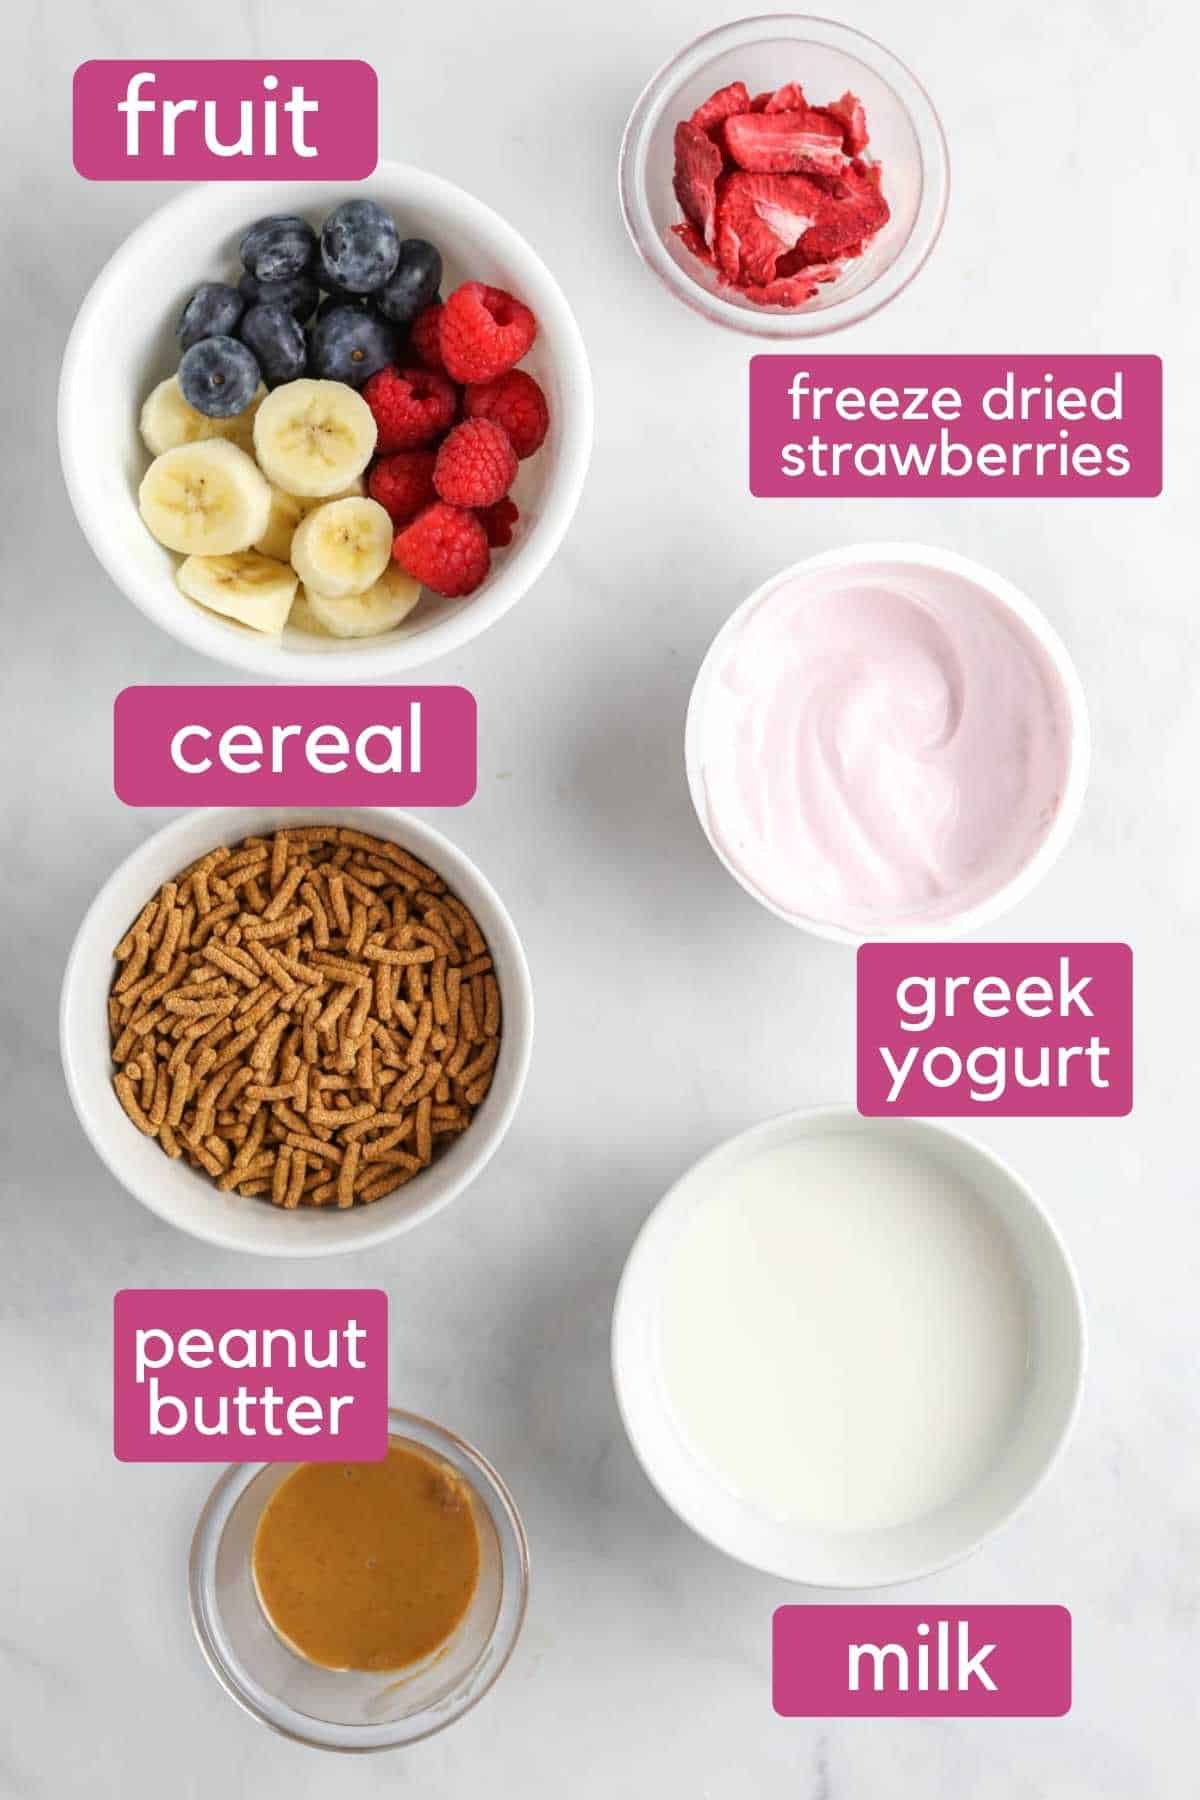 The ingredients needed to make a smoothie cereal bowl, including yogurt, milk, fruit, and cereal.